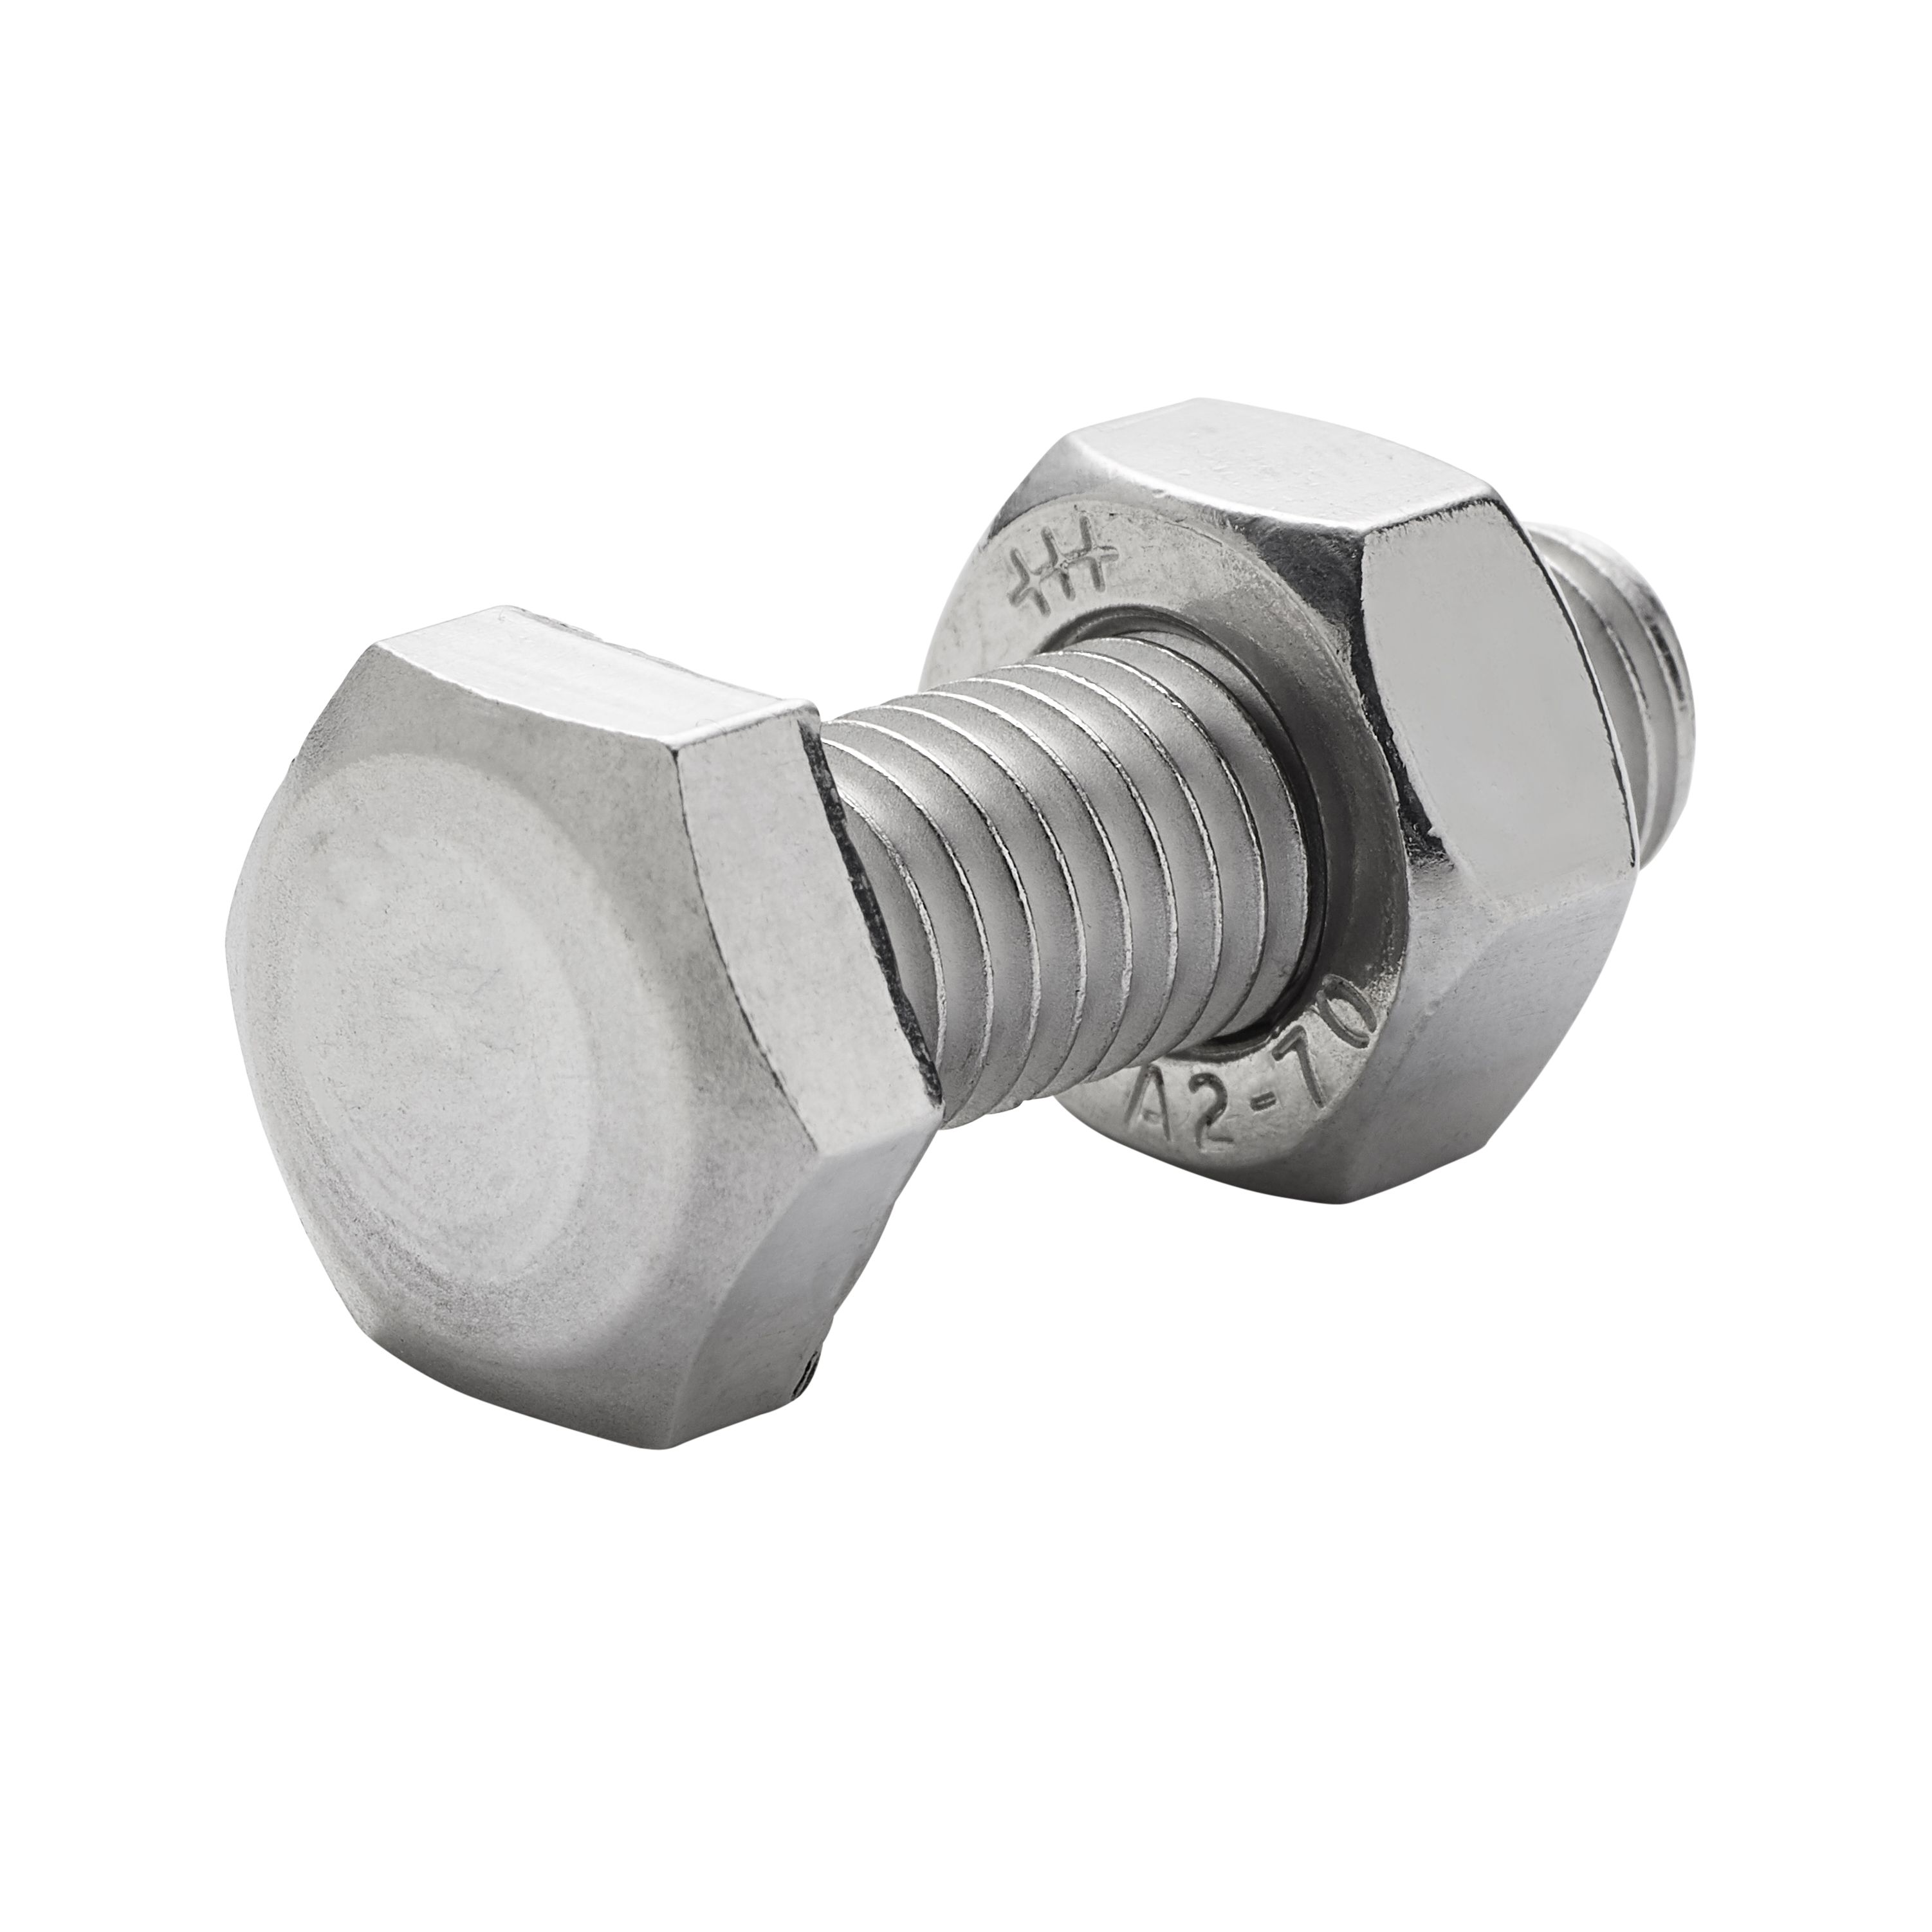 Diall M10 Hex A2 stainless steel Bolt & nut (L)30mm (Dia)10mm, Pack of 10